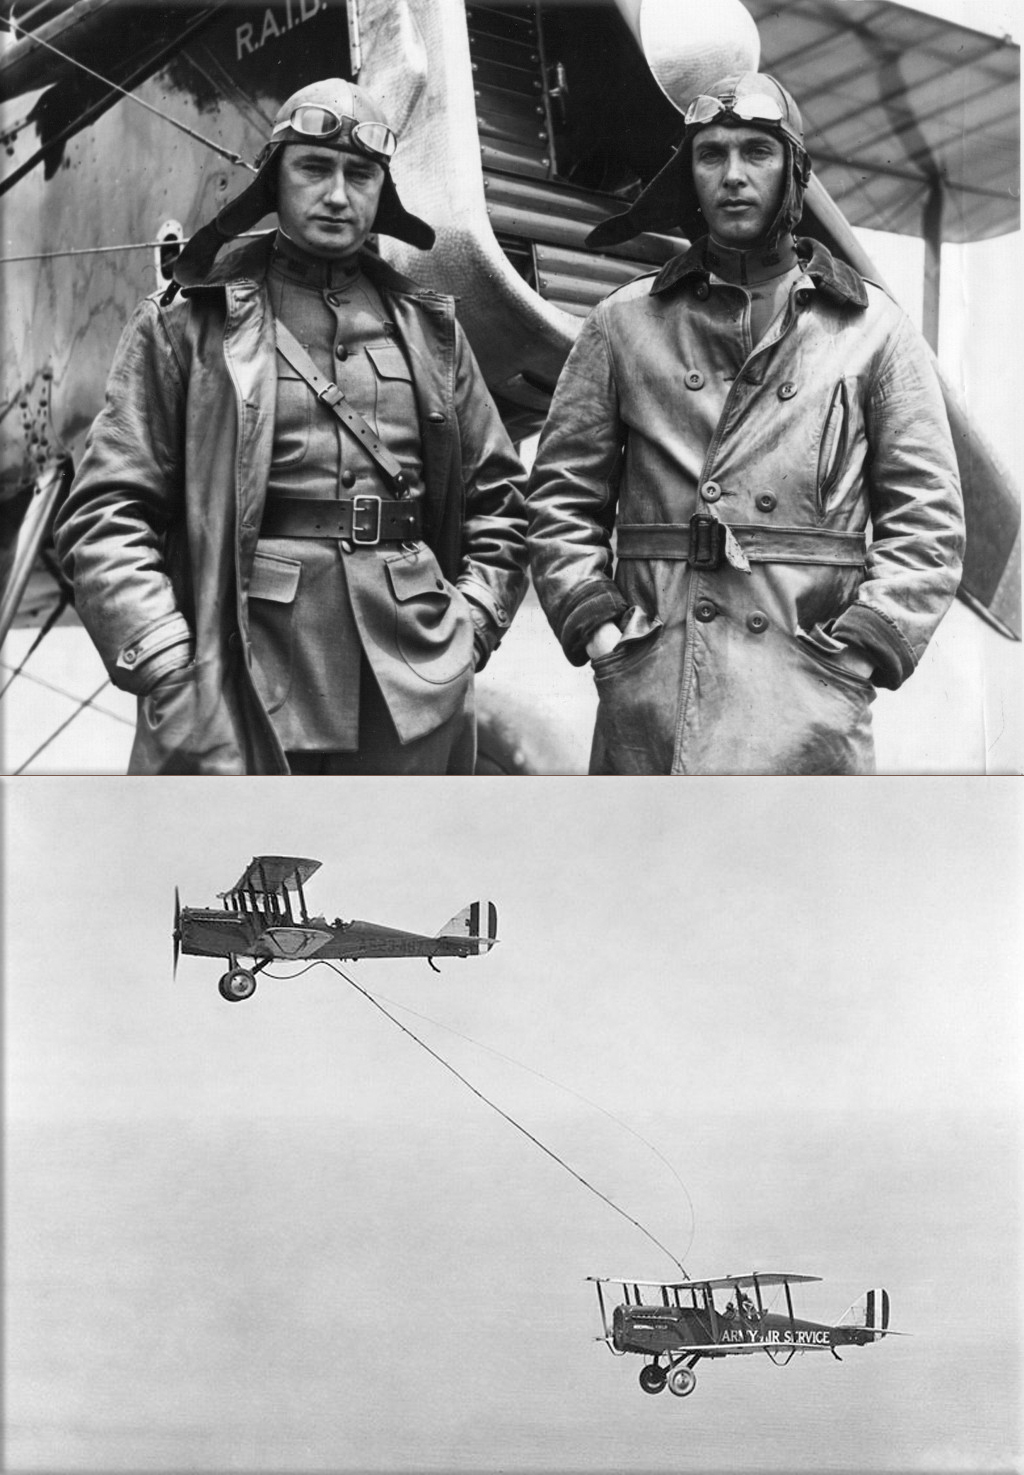 Captain Lowell H. Smith and Lt. John P. Richter perform the first ever aerial refueling in a DH-4B biplane